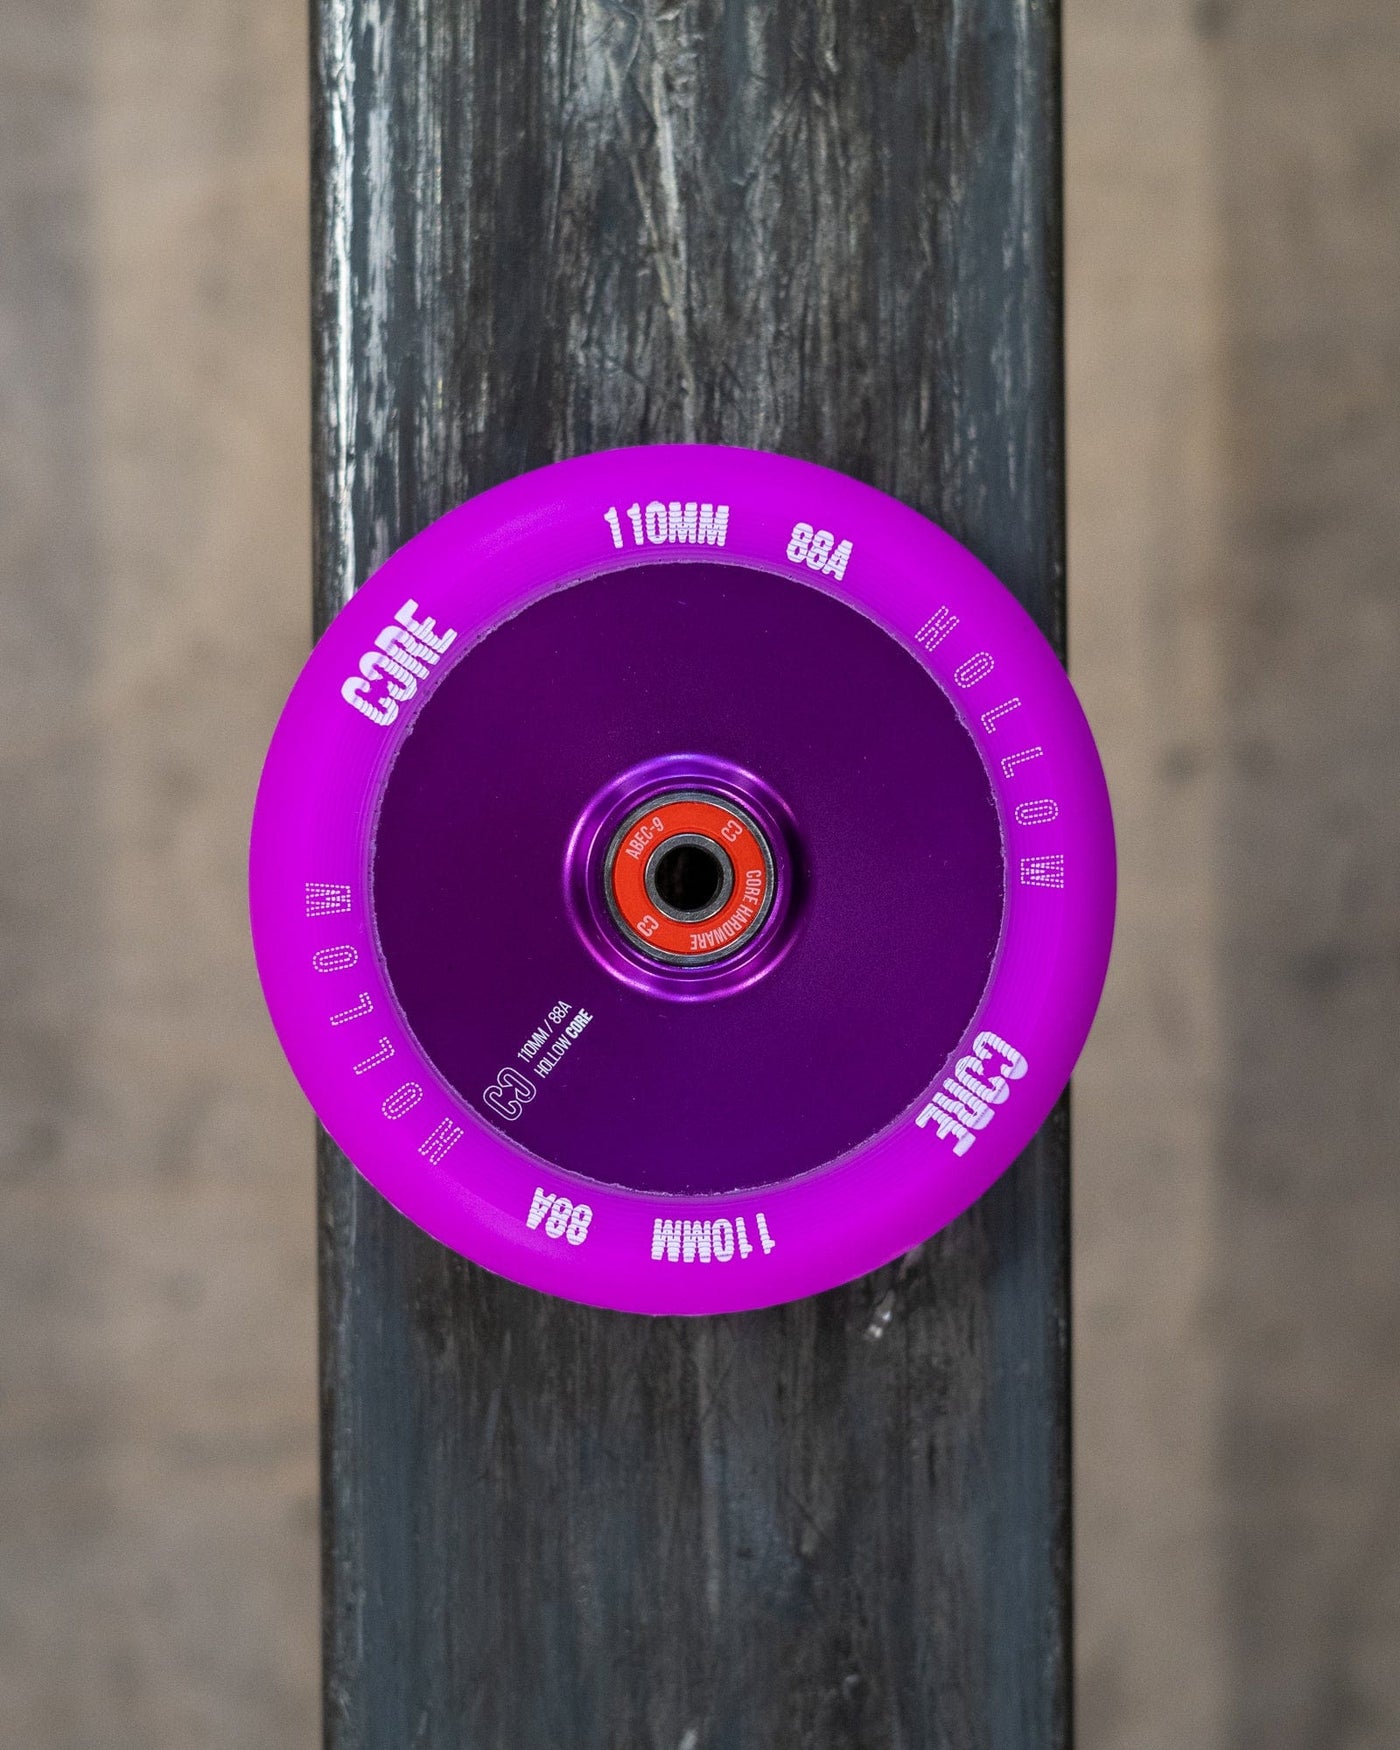 CORE Hollow Stunt Scooter Wheel V2 110mm - Purple 5060719852678 Side Laid Down